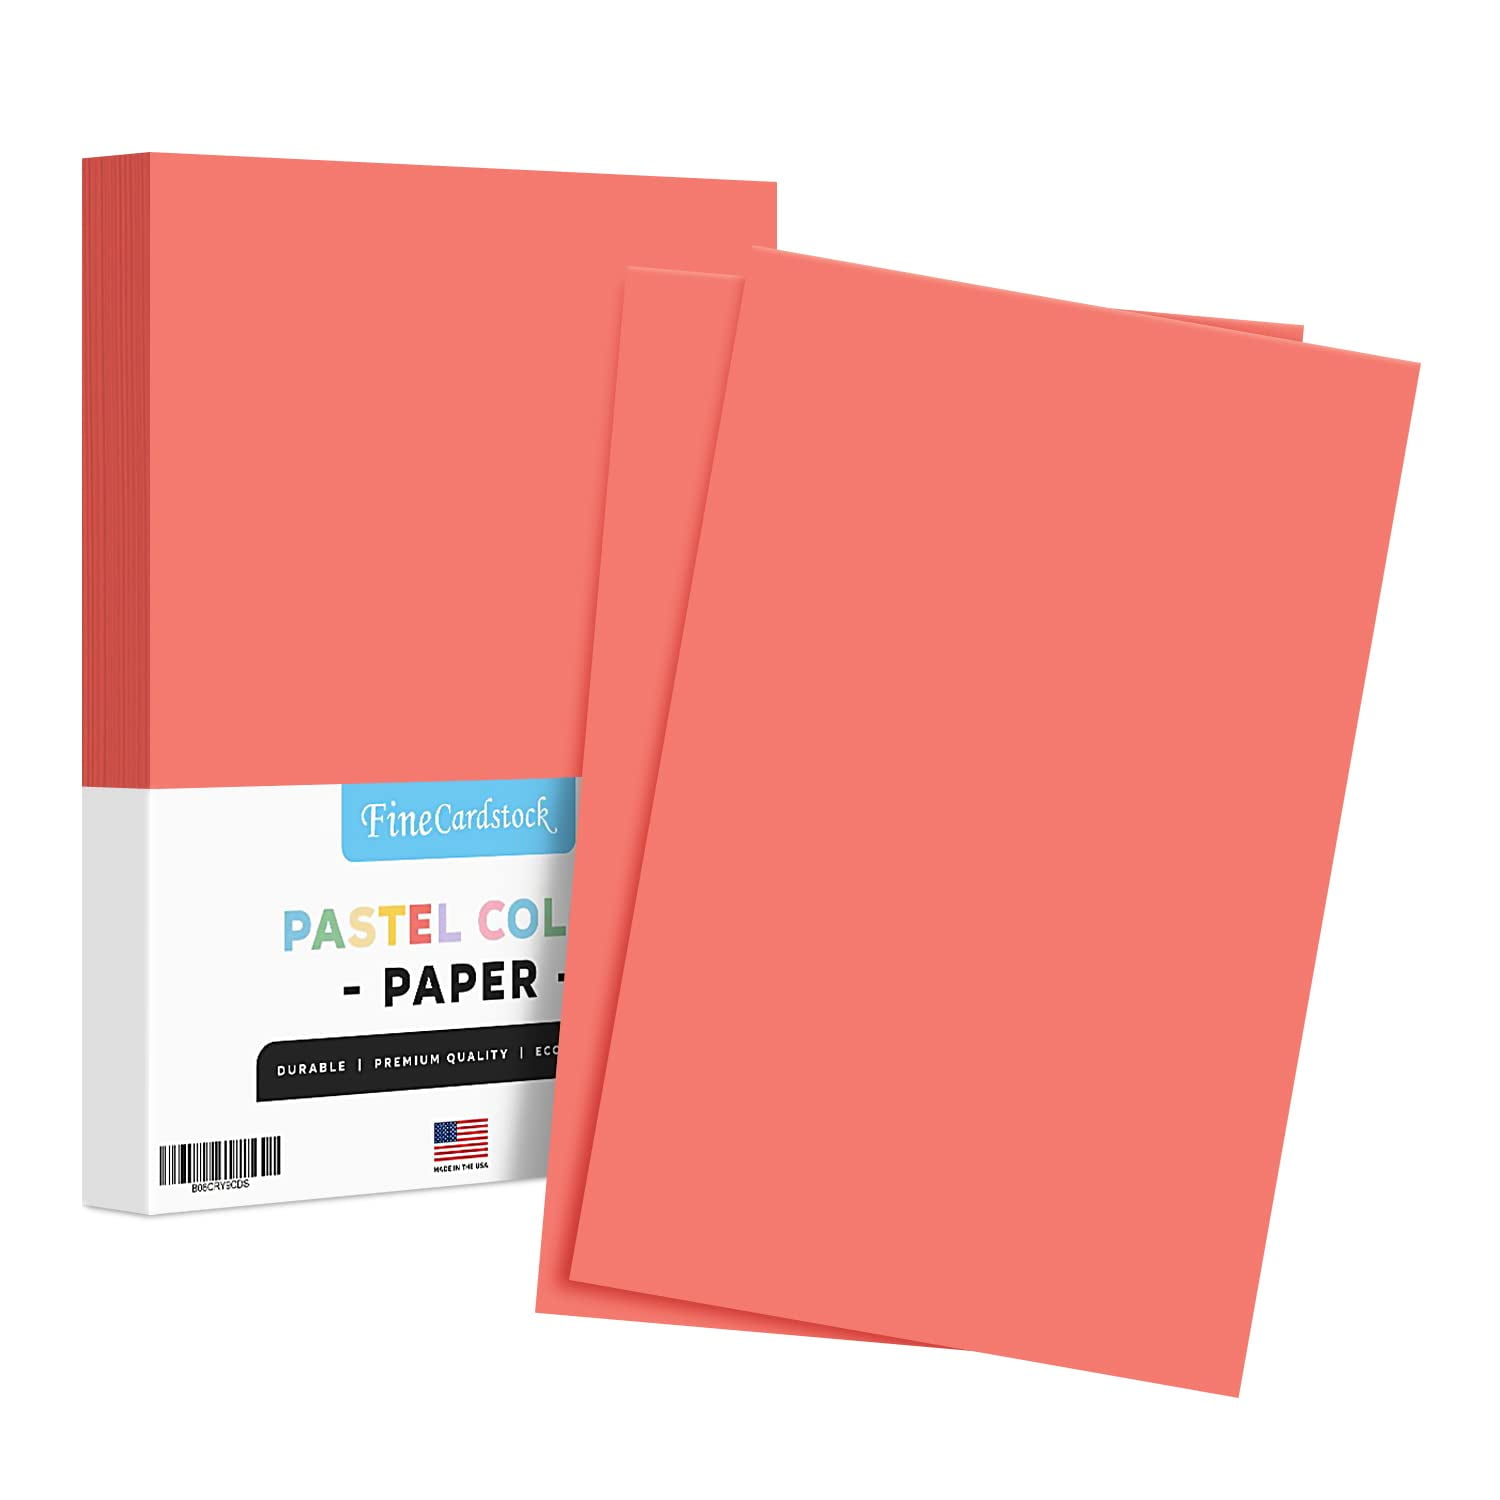 Green Pastel Colored Paper 11 inch x 17 inch (Tabloid / Ledger Size) Perfect for Documents, Invitations, Posters, Flyers, Menus, Arts and Crafts 